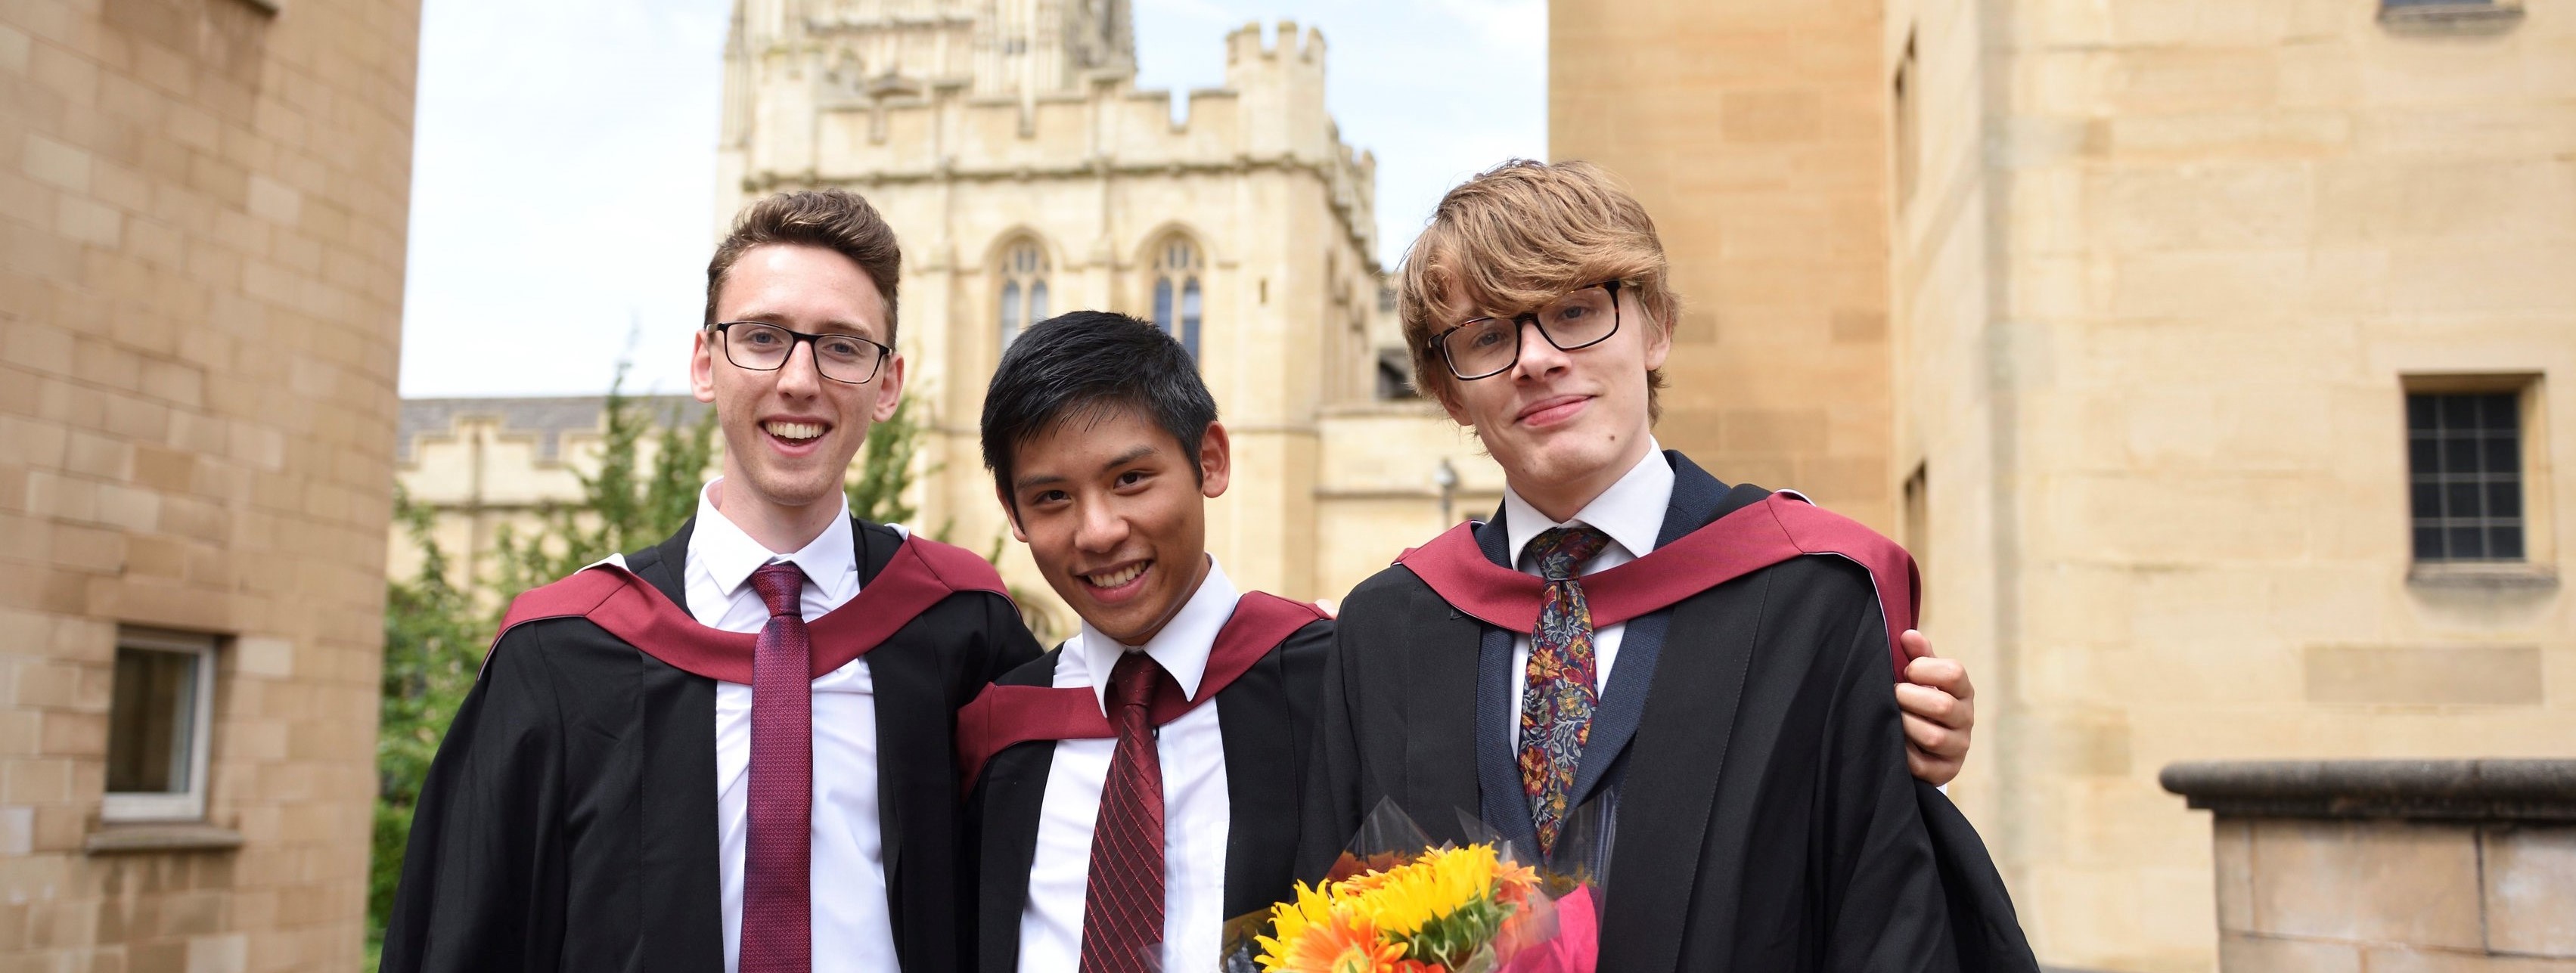 Three students in graduation gowns smile for the camera. A section of the Wills Memorial building is visible in the background. One of the graduands is holding a bouquet of flowers.